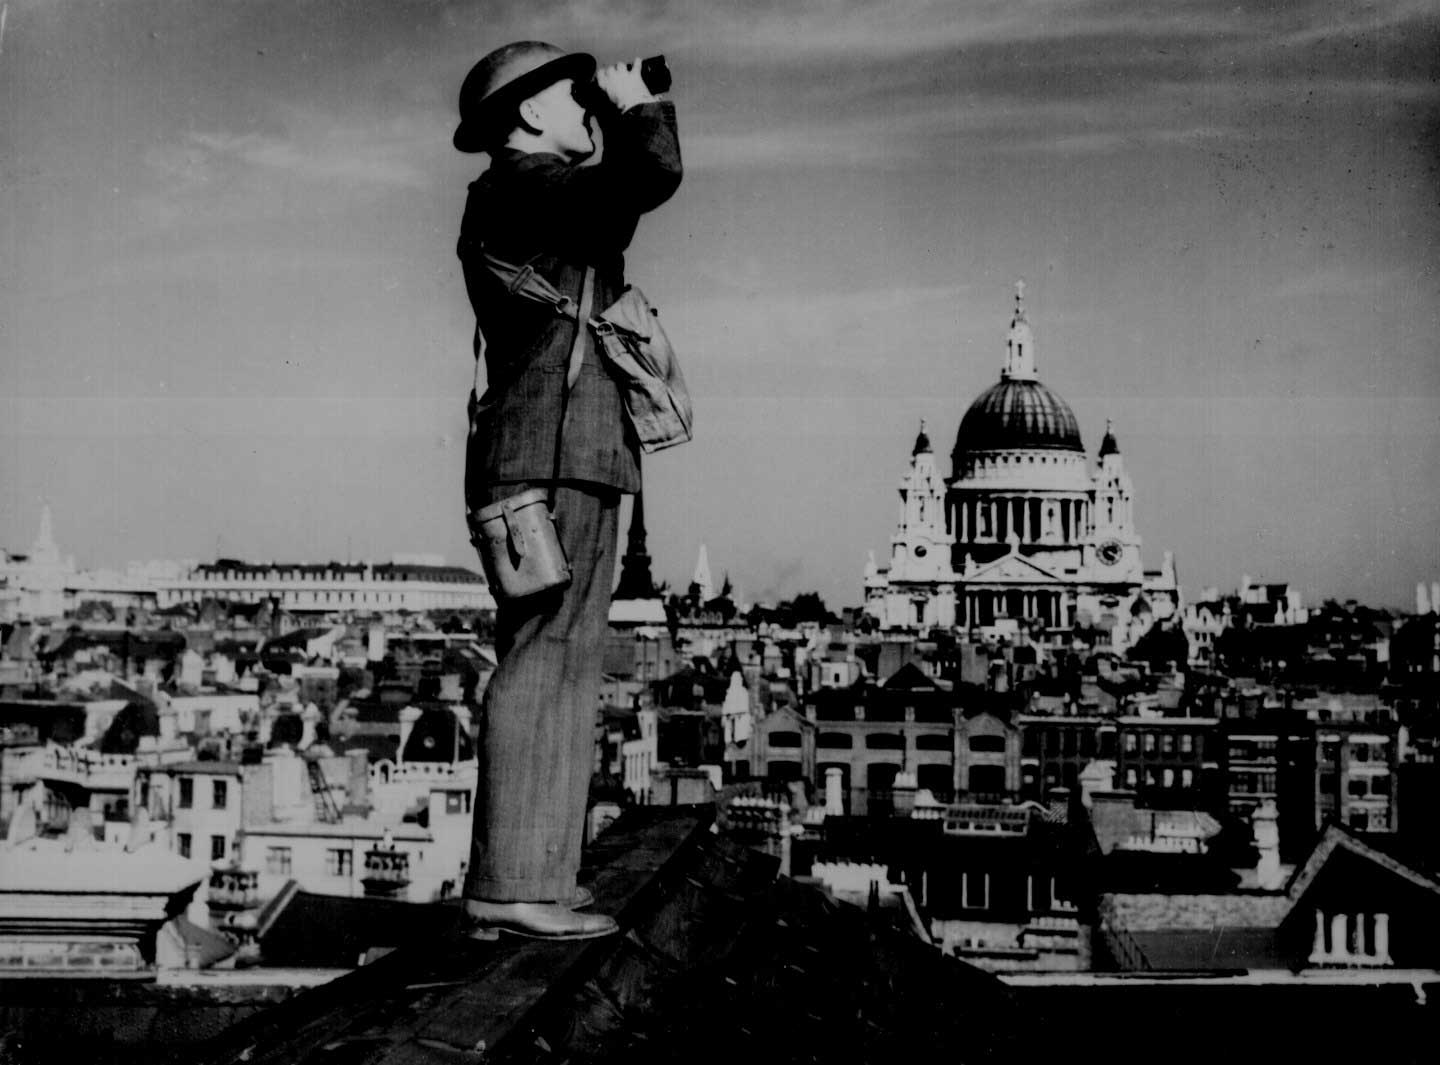 An aircraft spotter atop a London building, St. Paul's Cathedral in background, early 1940s